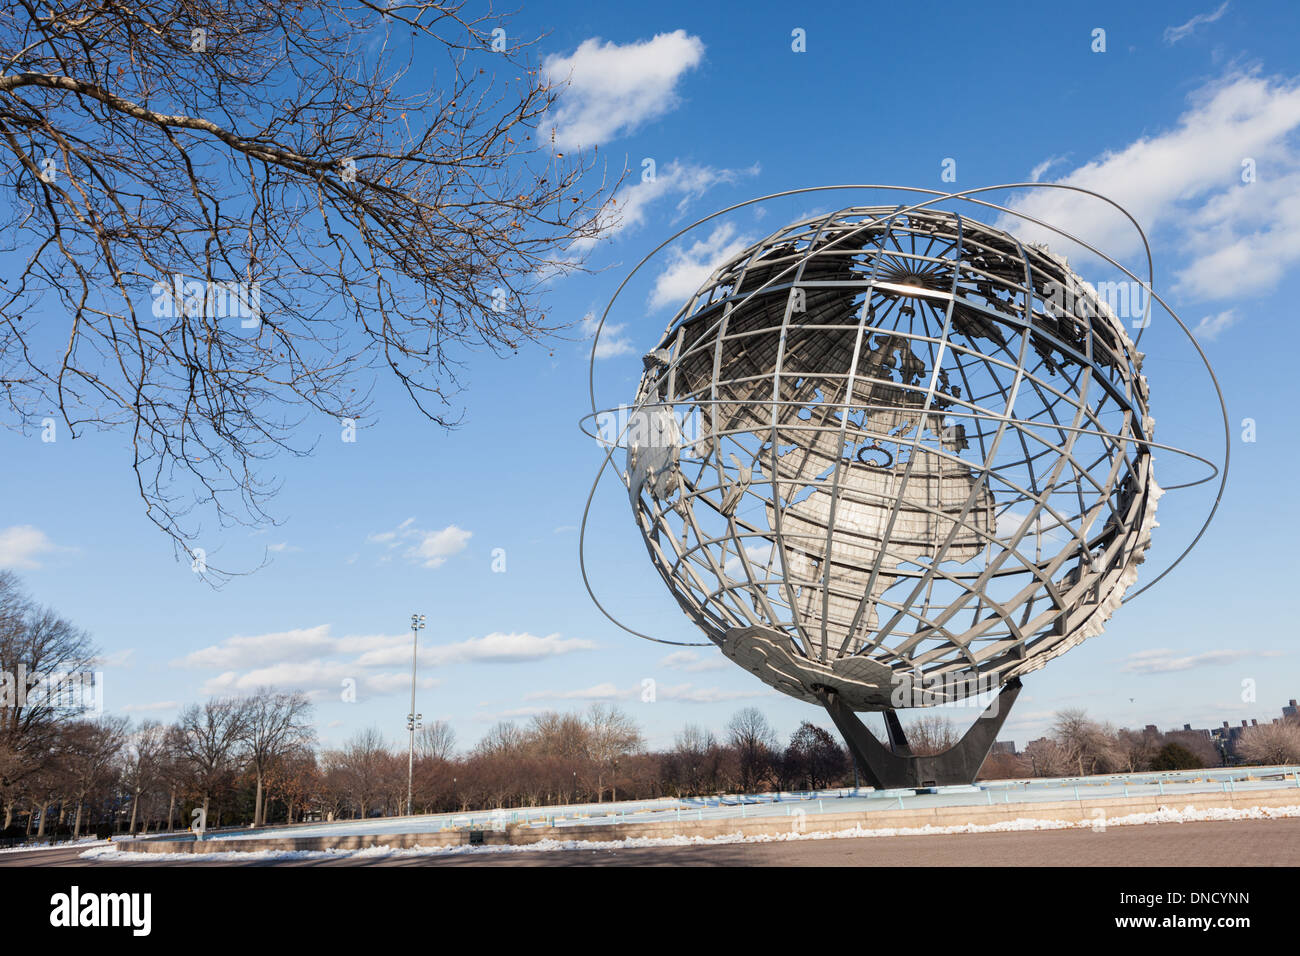 Unisphere, stainless steel, 12 stories high, built for 1964 World's Fair, Flushing Meadows, Queens, New York Stock Photo